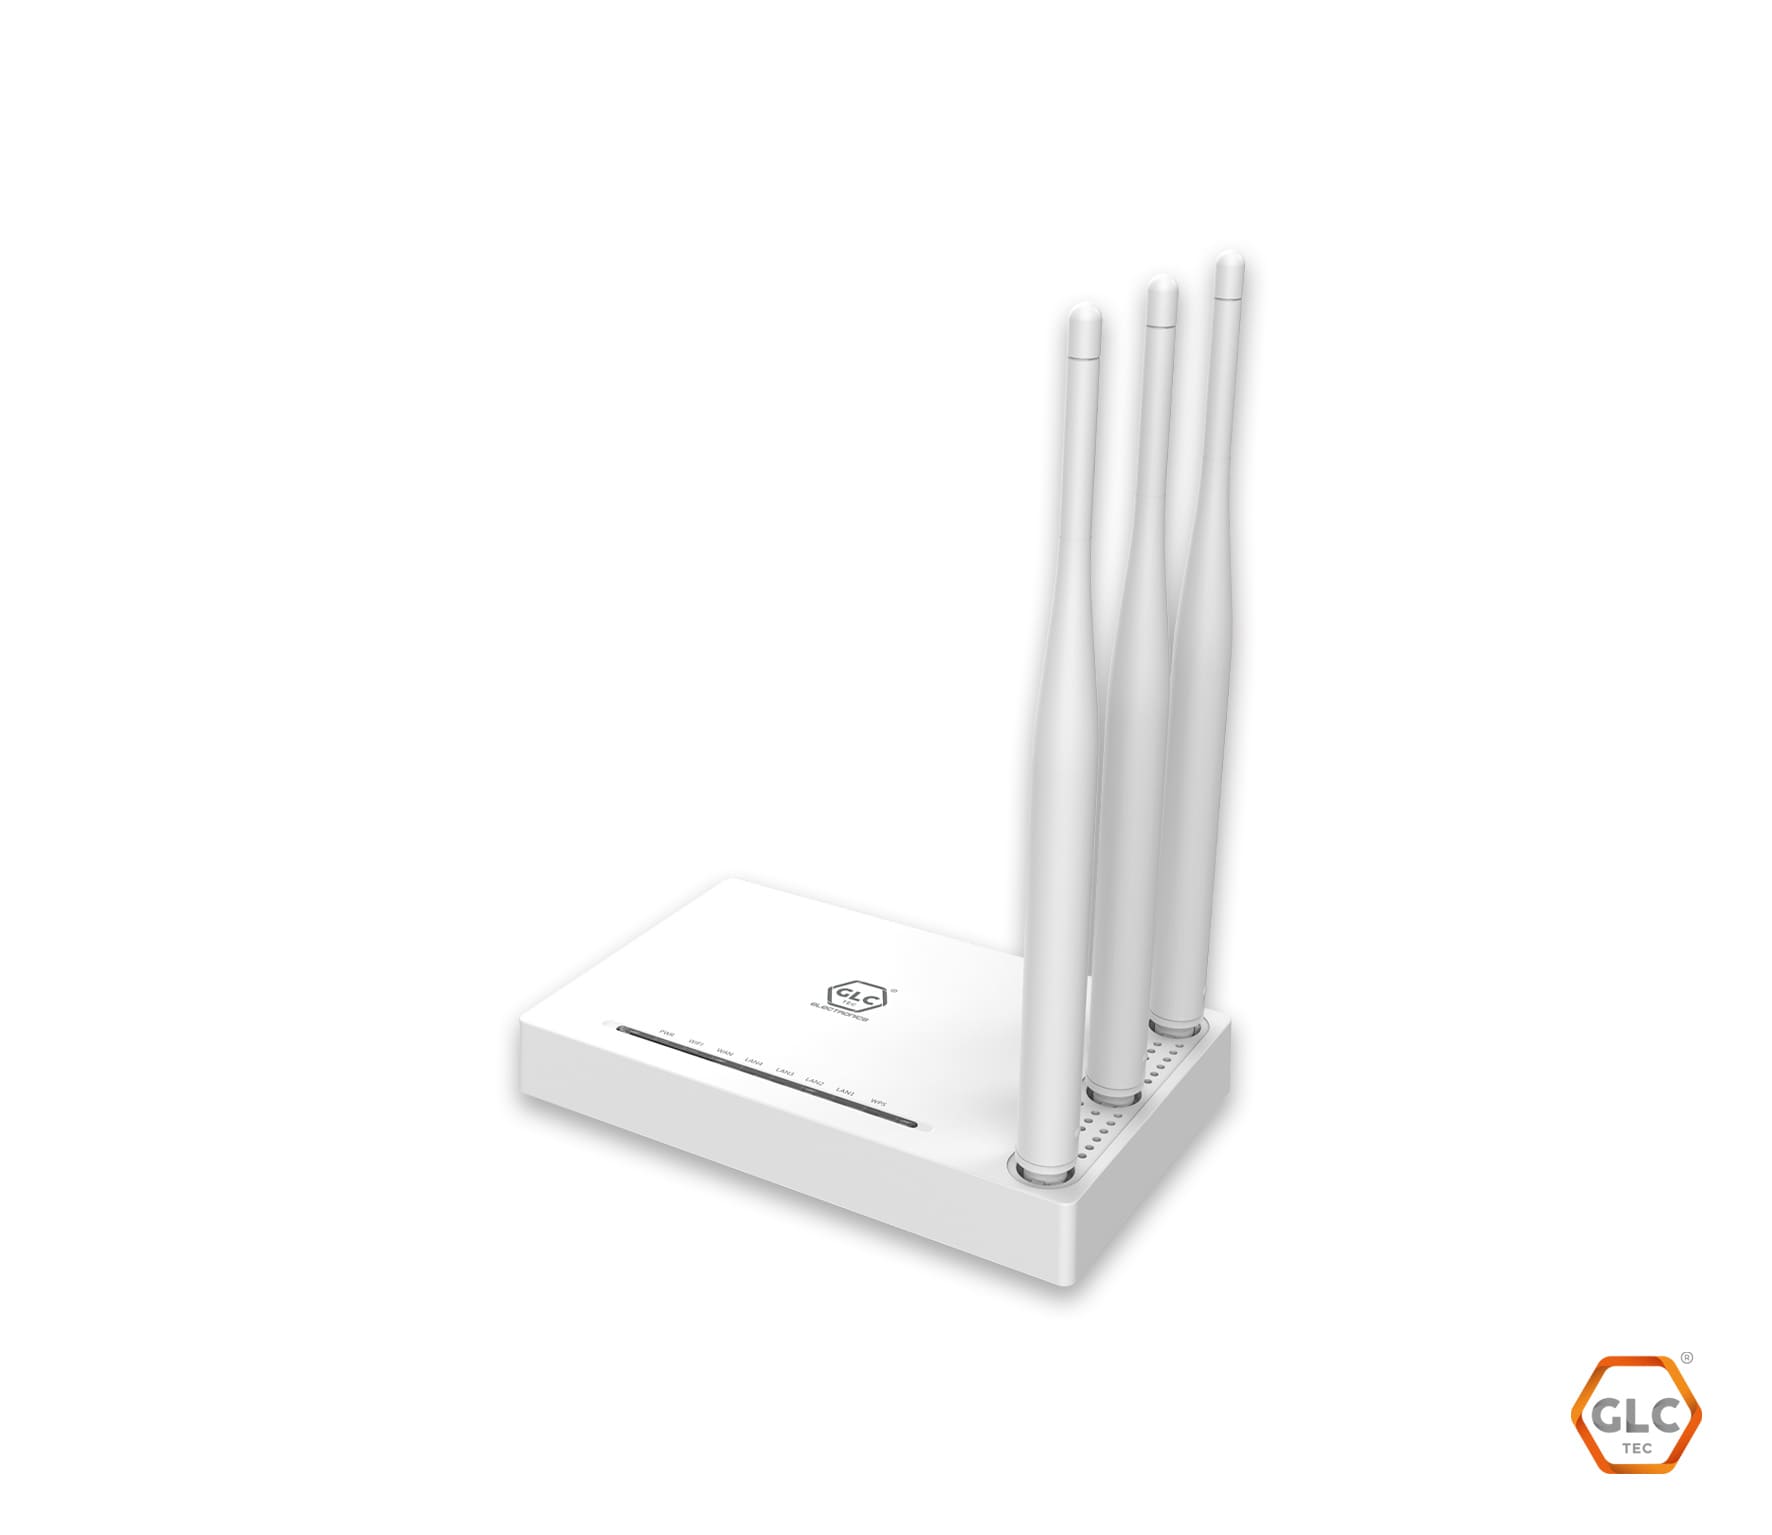 ROUTER WIFI GLC N3 300MBPS	